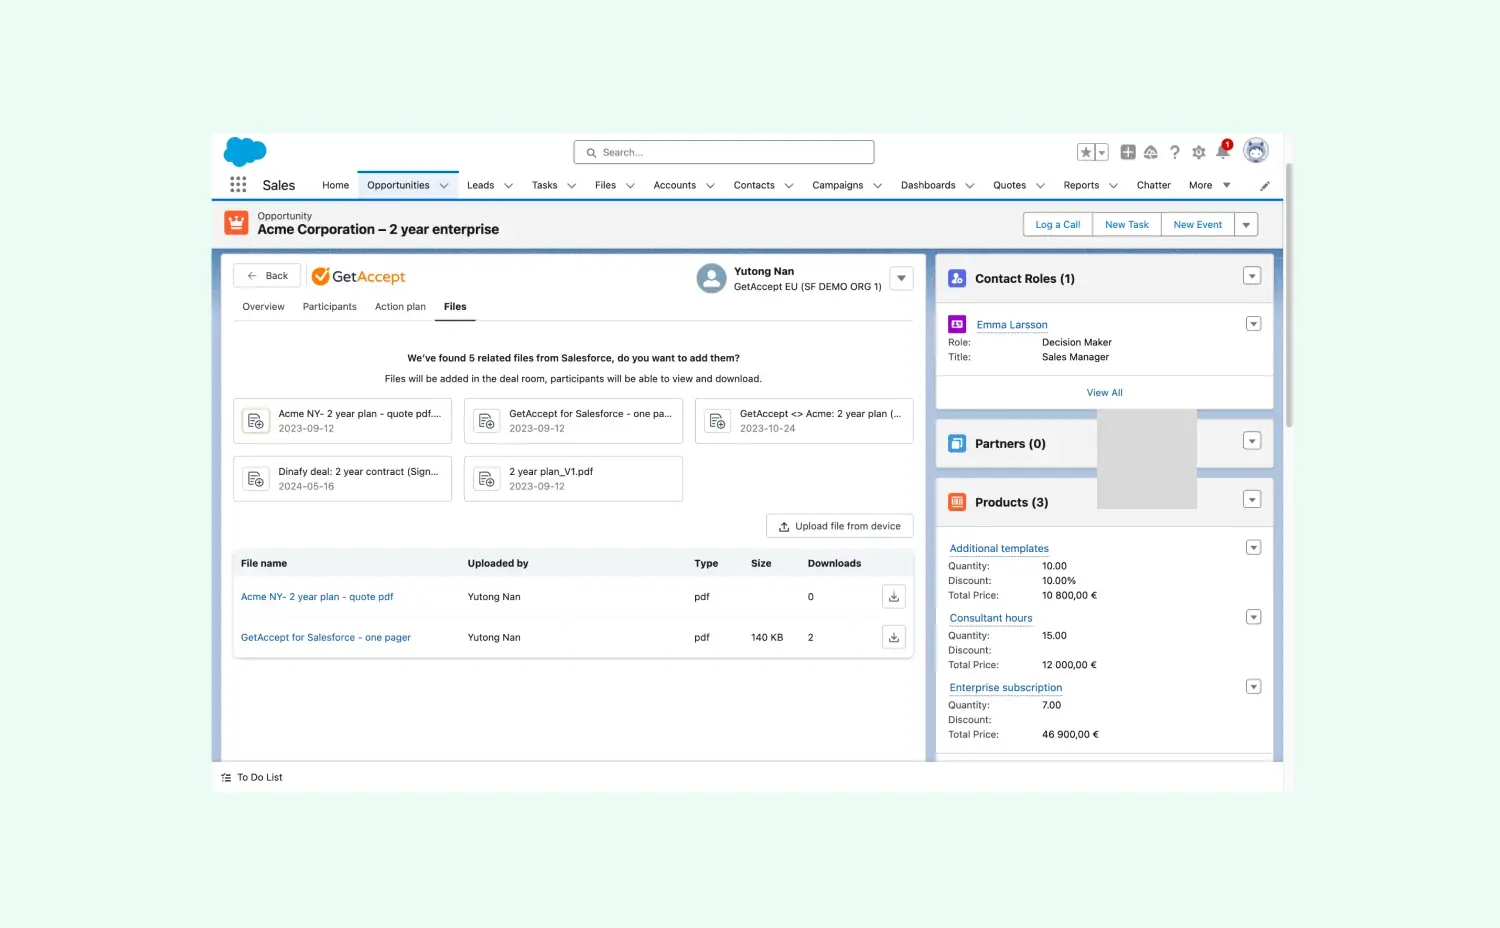 Share files with your stakeholders directly from Salesforce